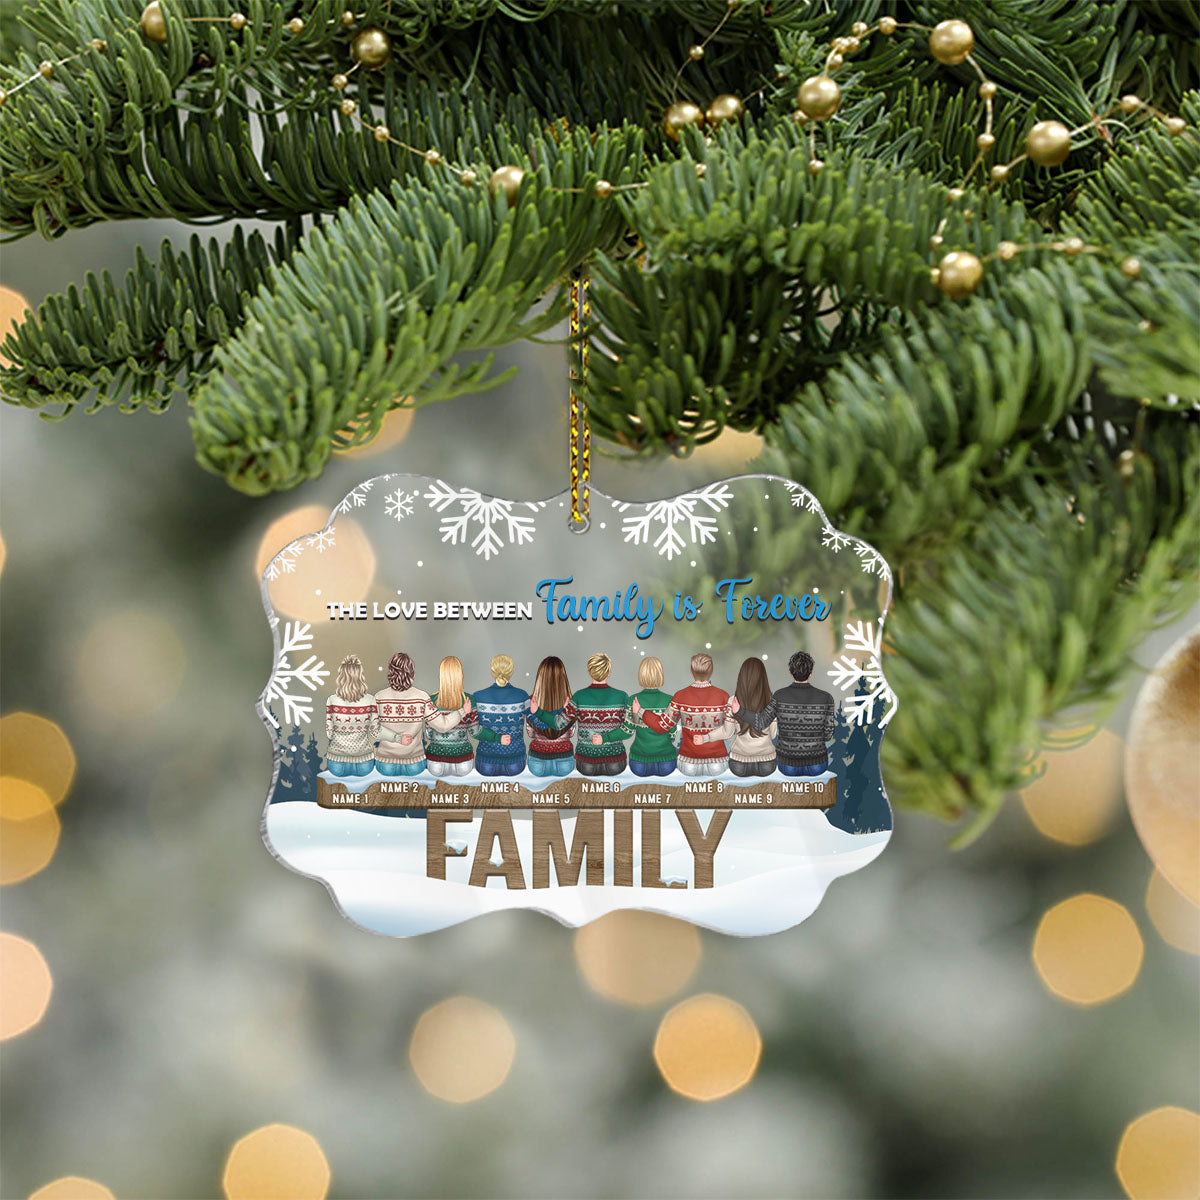 The Love Between Family Is Forever Personalized Custom Name Acrylic Ornaments - Christmas Gift